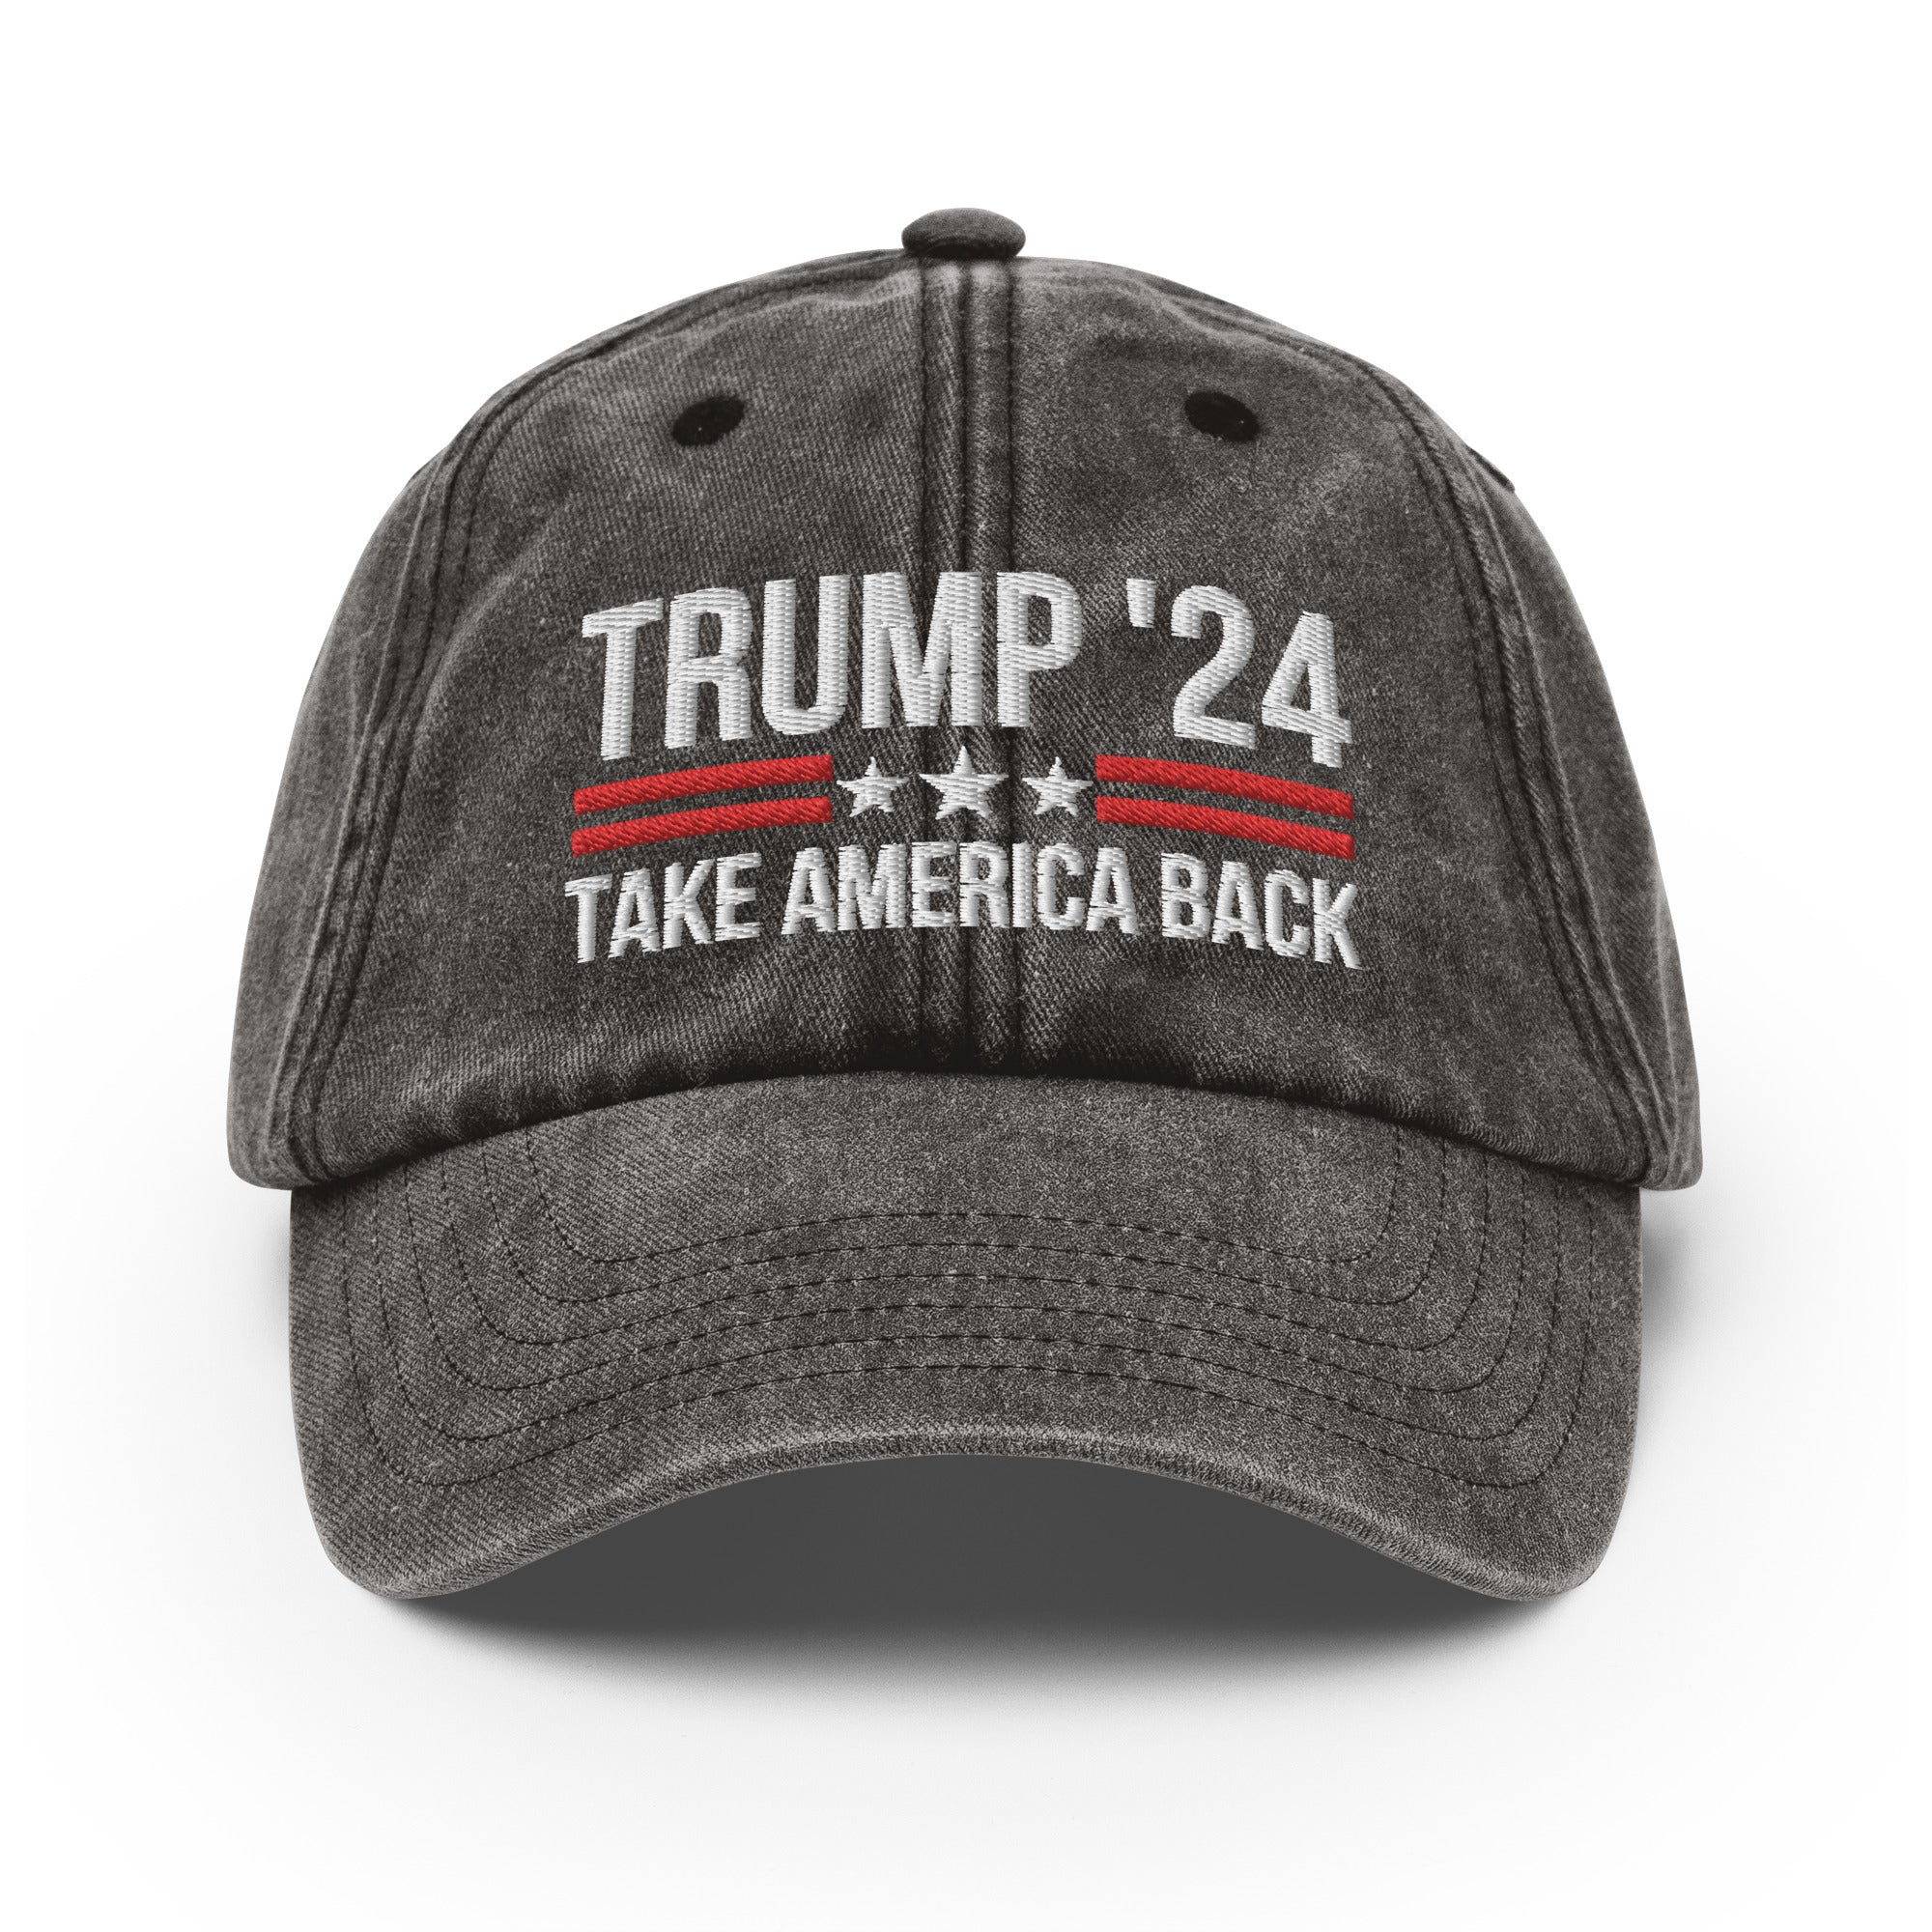 TRUMP 2024 Take America Back Hat, Take America Back Vintage Hat, President Trump Cap, MAGA 2024 Dad Hat, Republican Gifts, Conservative Hats - Madeinsea©